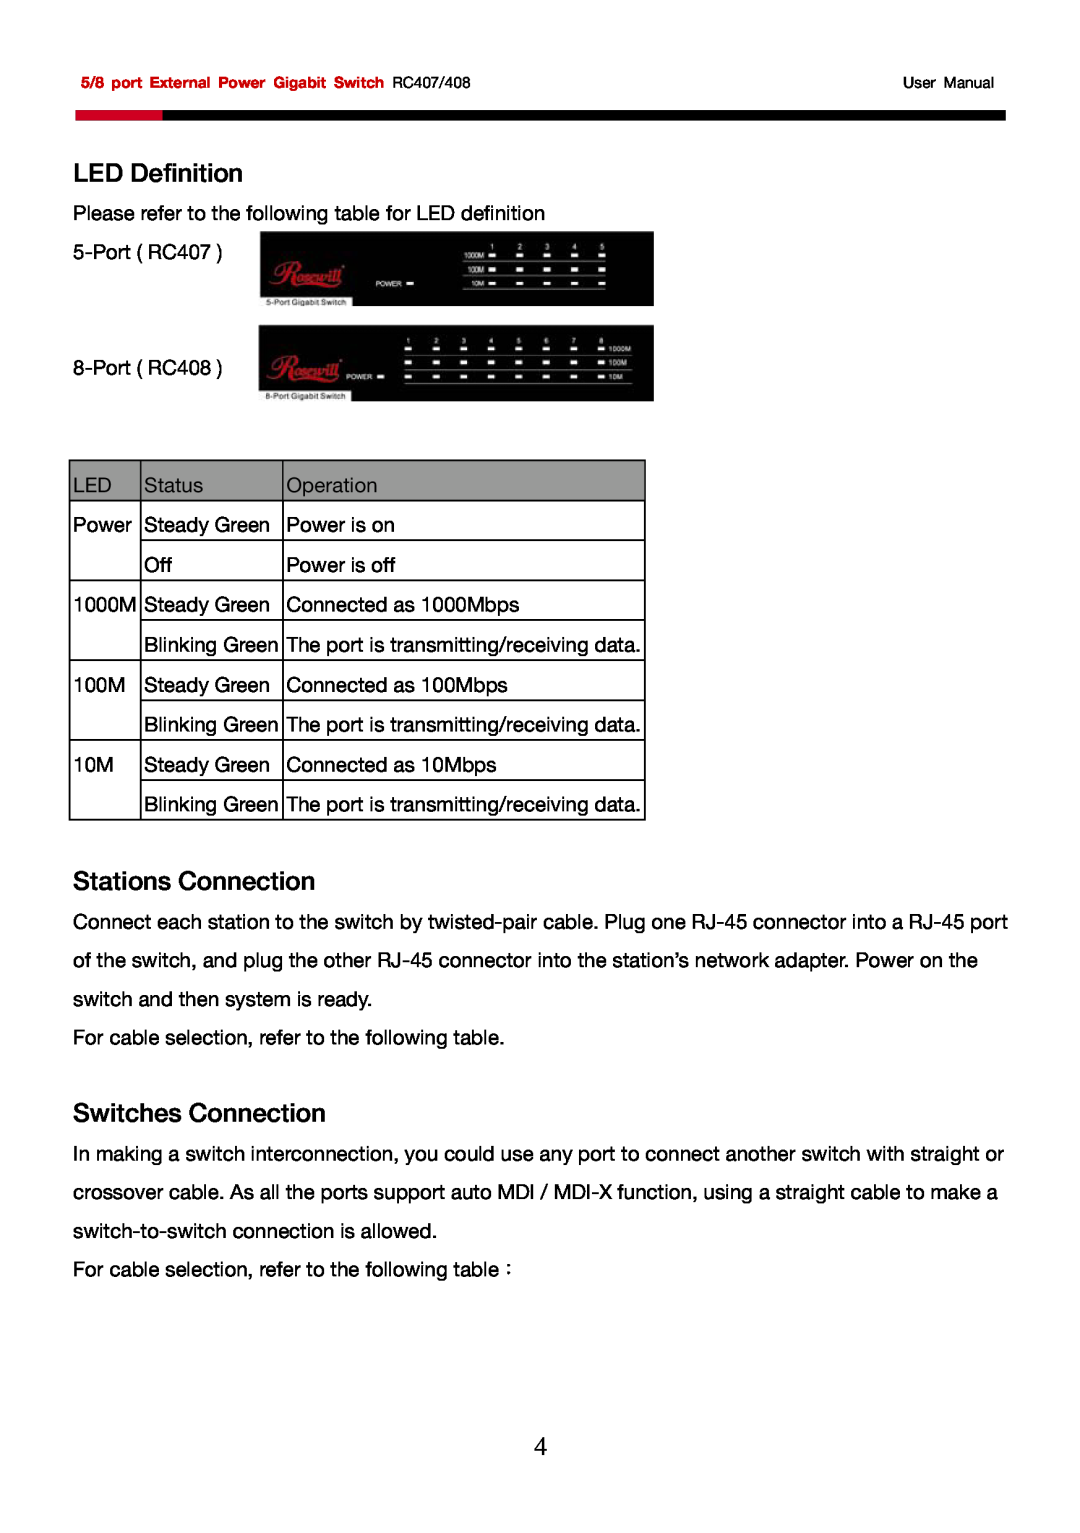 Rosewill RC-408, RC-407 user manual LED Definition, Stations Connection, Switches Connection 